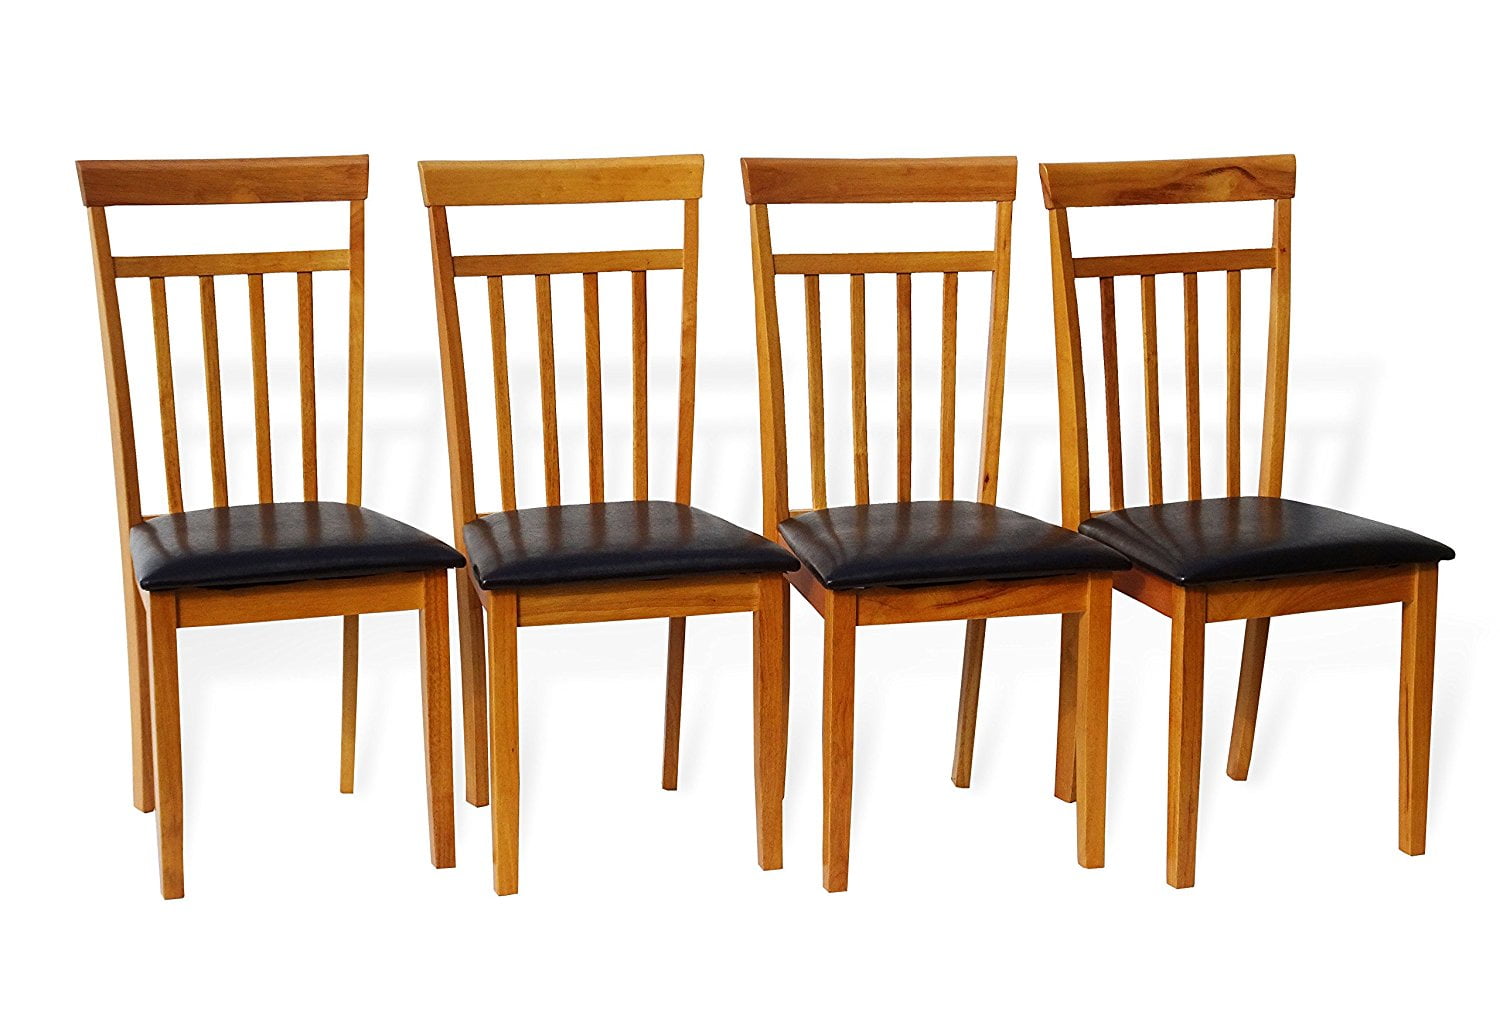 Set Of 4 Dining Kitchen Side Chairs Warm Solid Wooden In Maple Finish